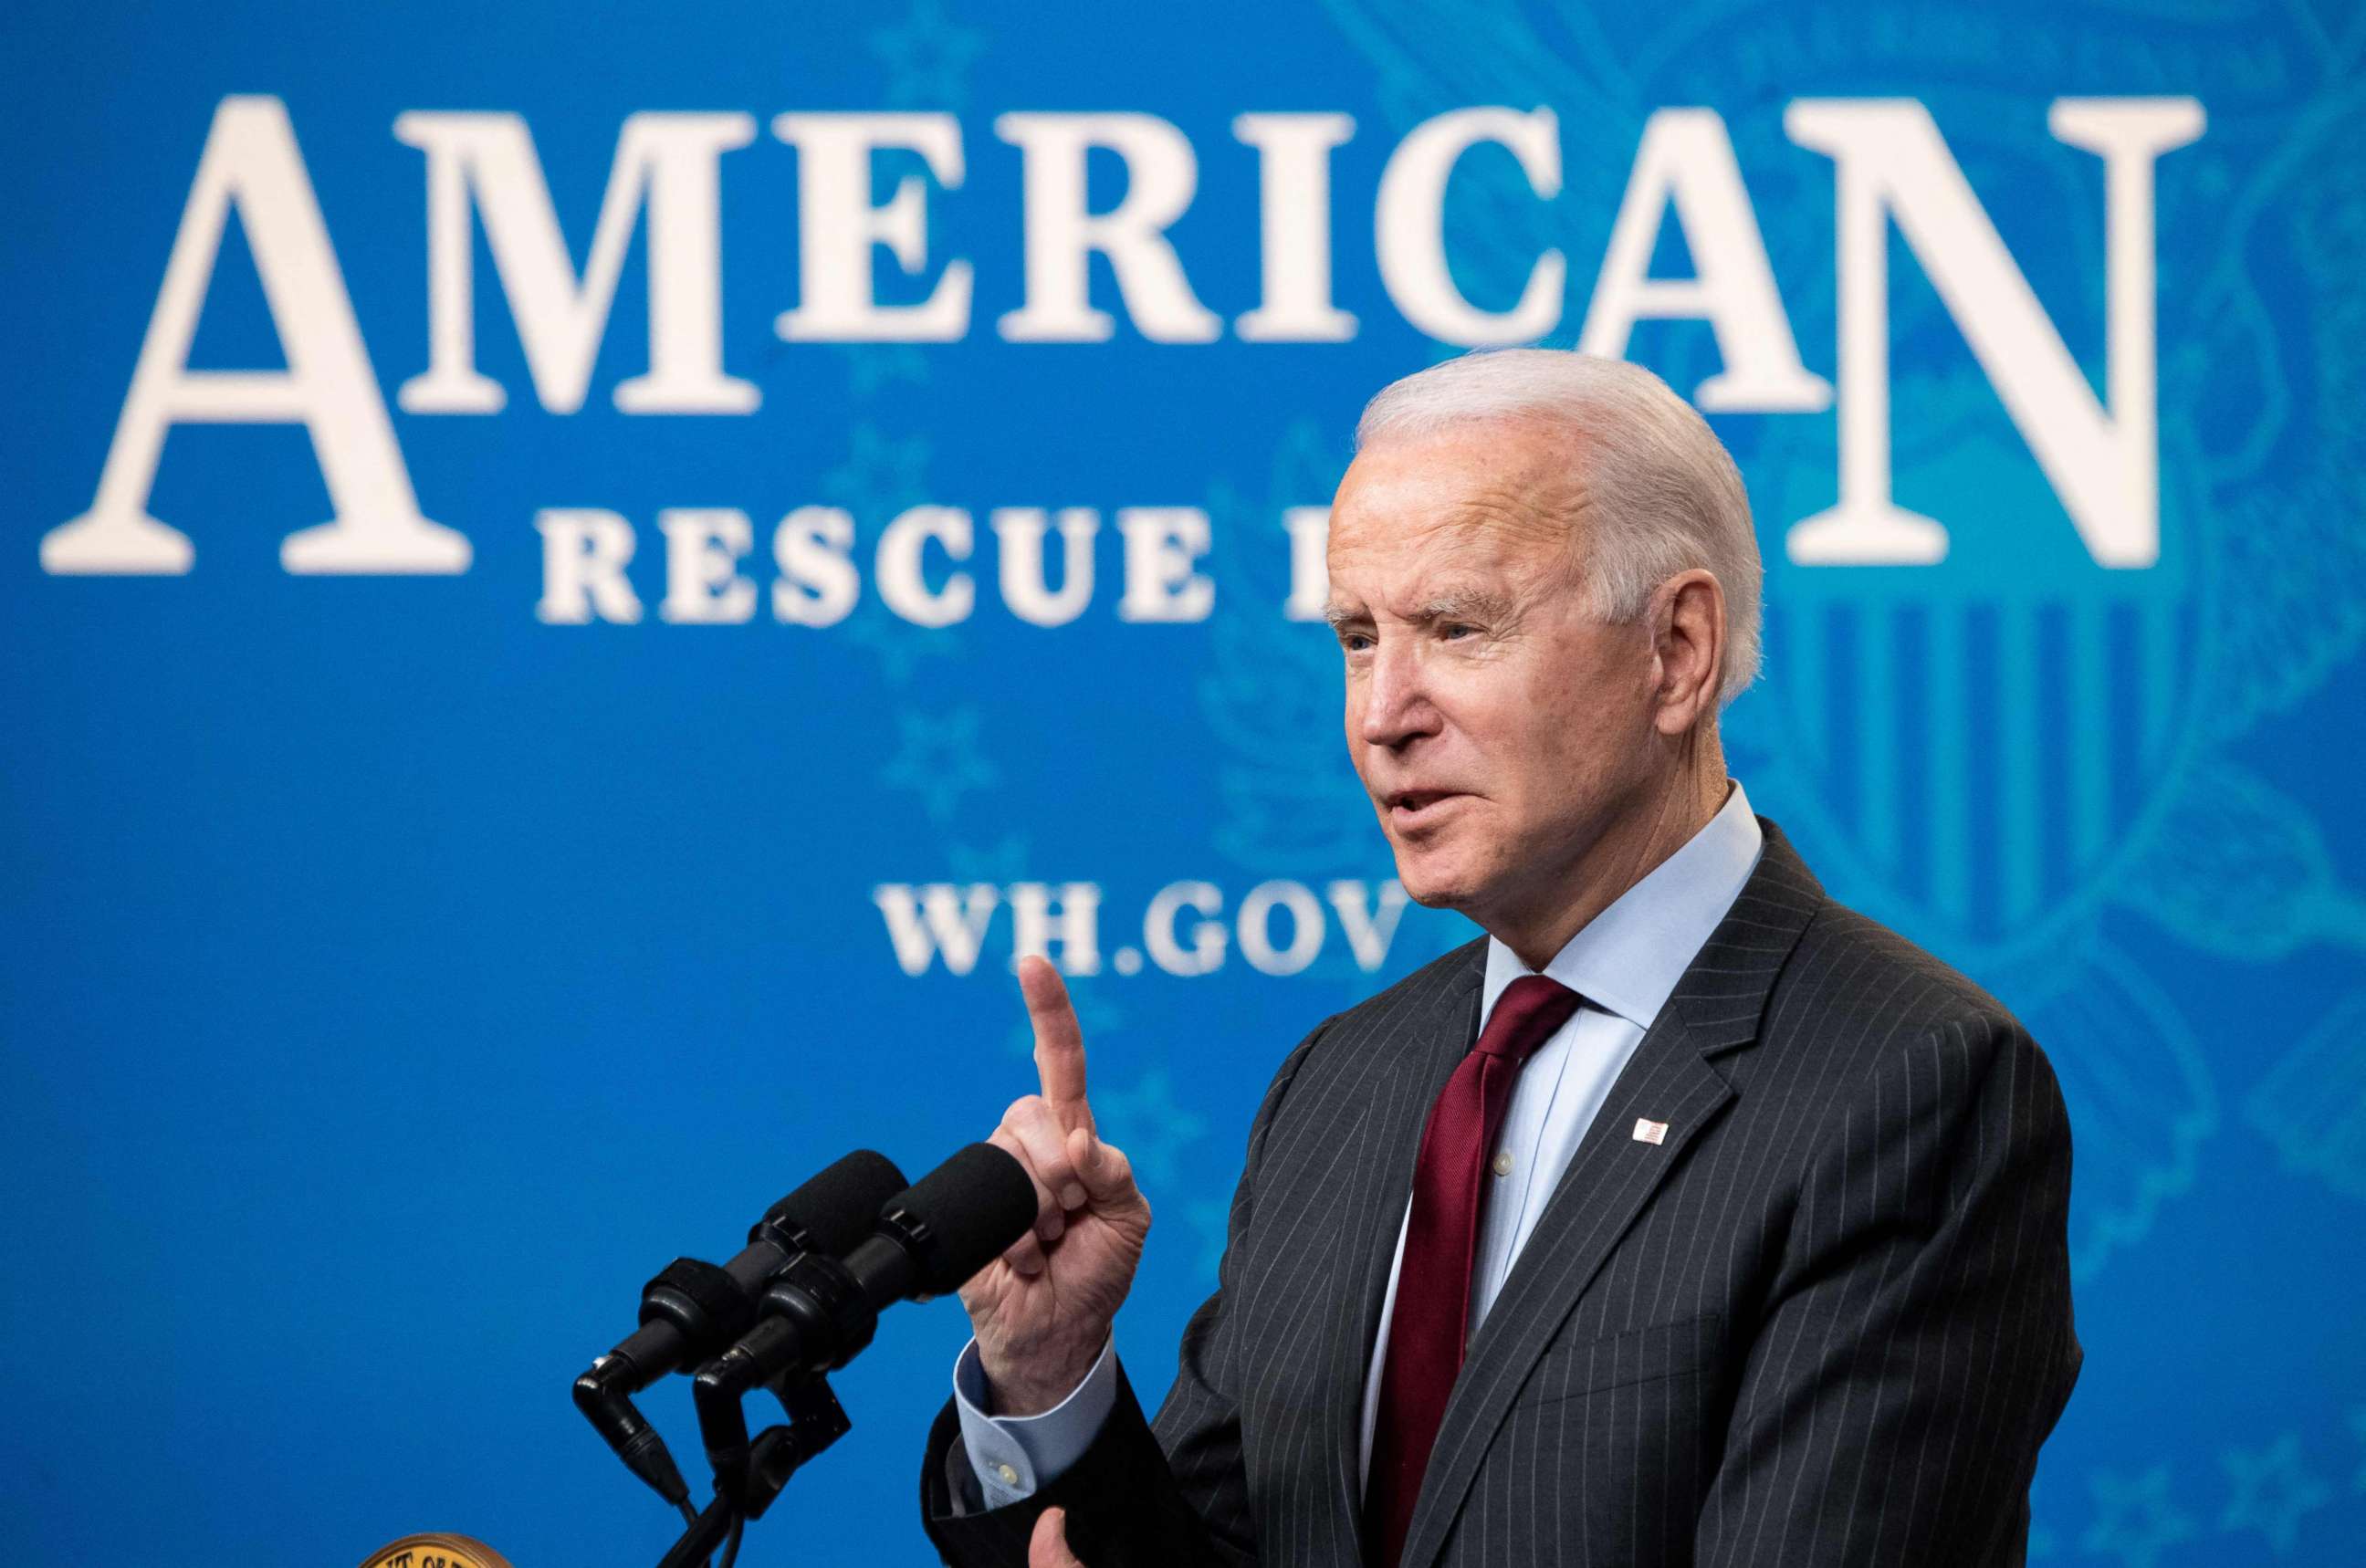 PHOTO: President Joe Biden speaks about the American Rescue Plan and the Paycheck Protection Program for small businesses in response to coronavirus, in the Eisenhower Executive Office Building in Washington, D.C., Feb. 22, 2021.